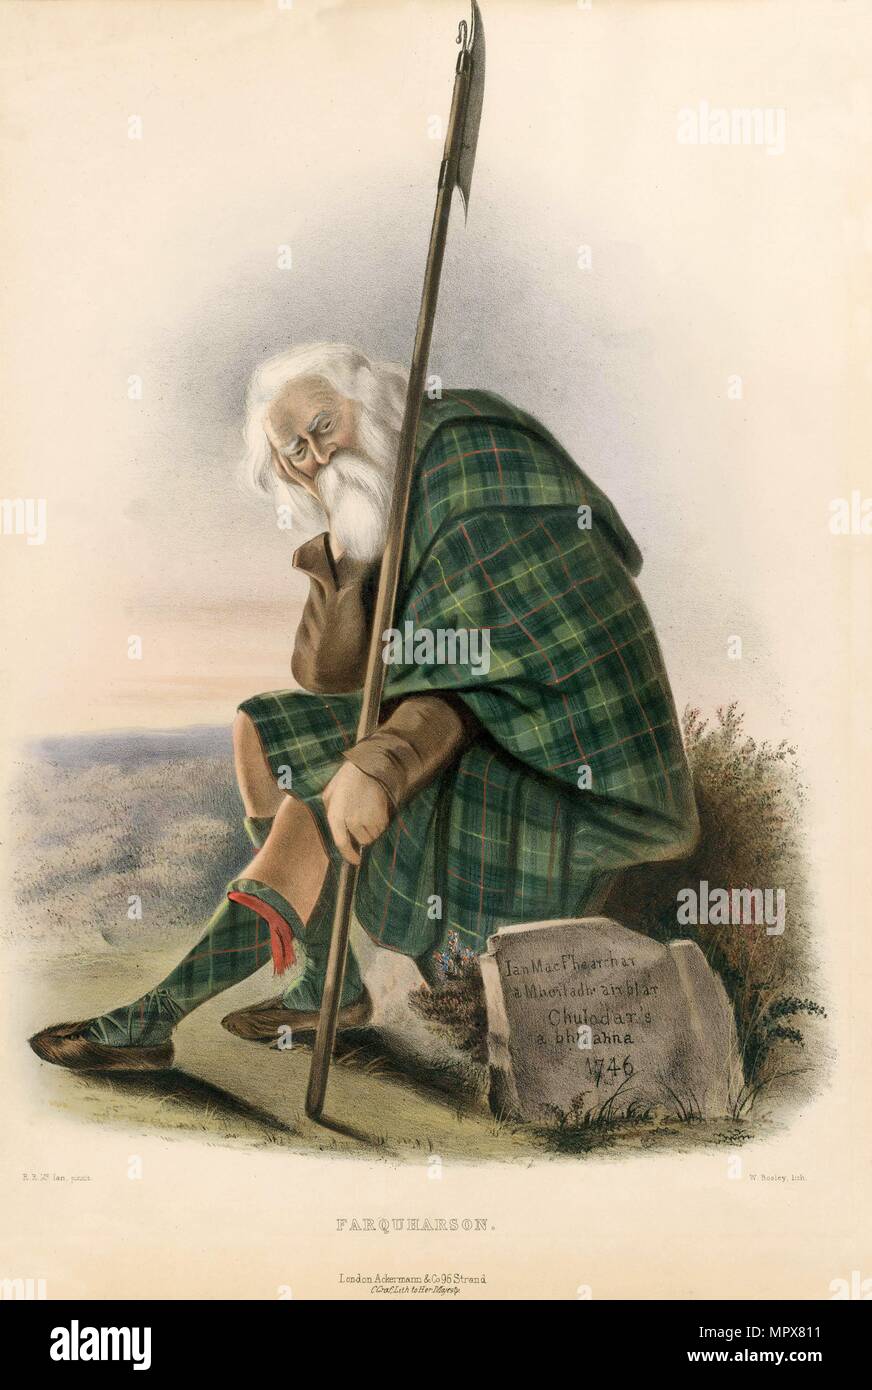 Farquharson, from The Clans of the Scottish Highlands, pub. 1845 (colour lithograph) Stock Photo